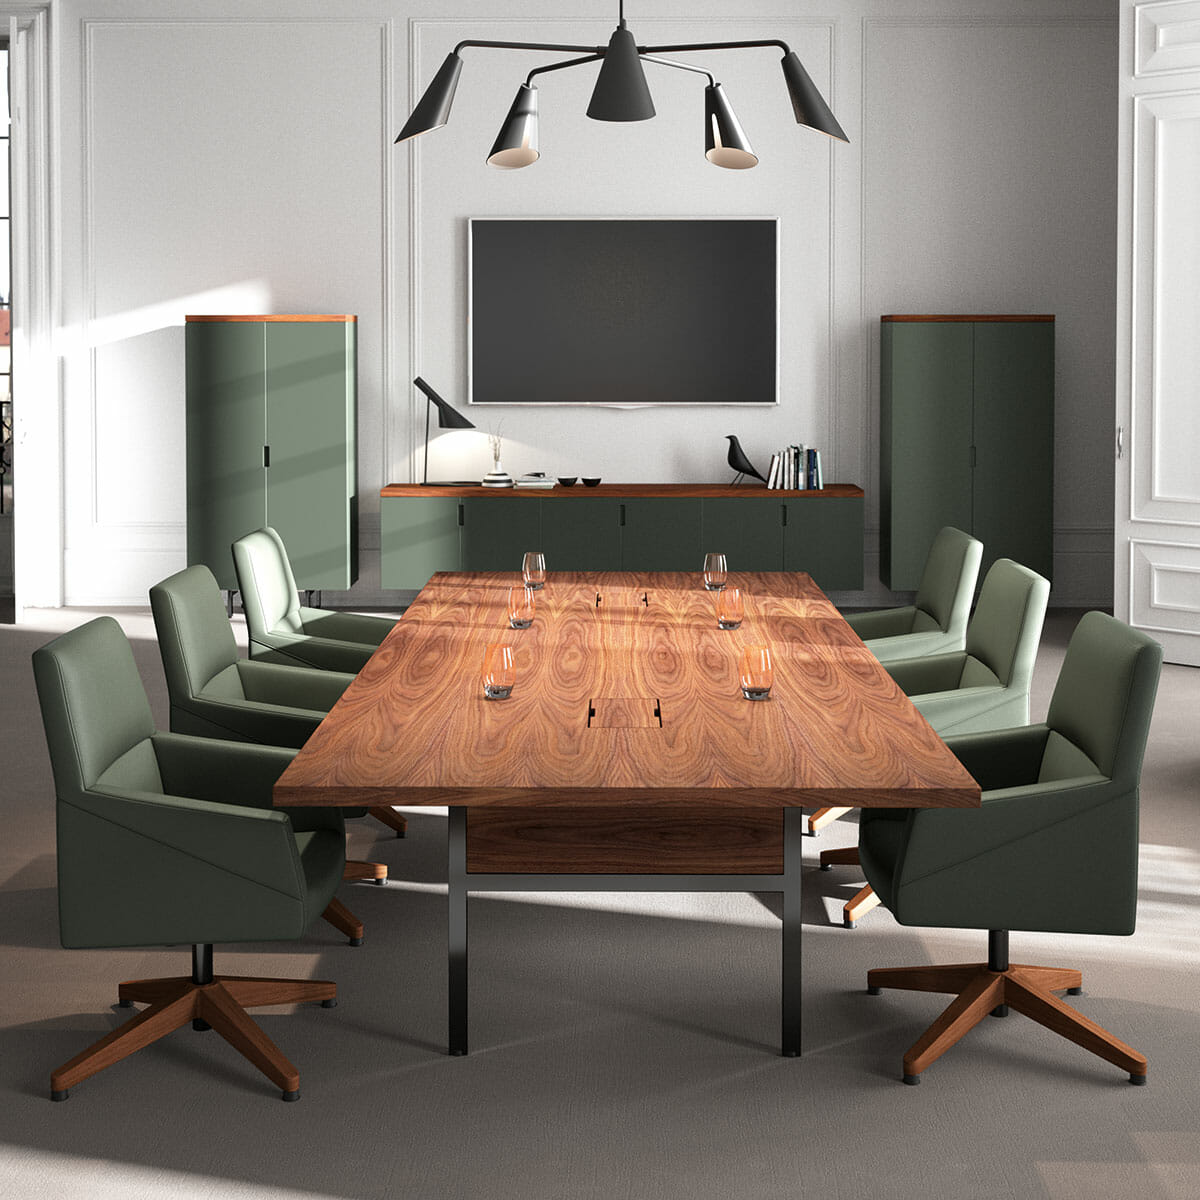 ofifran-gallery-meeting-room-table-t